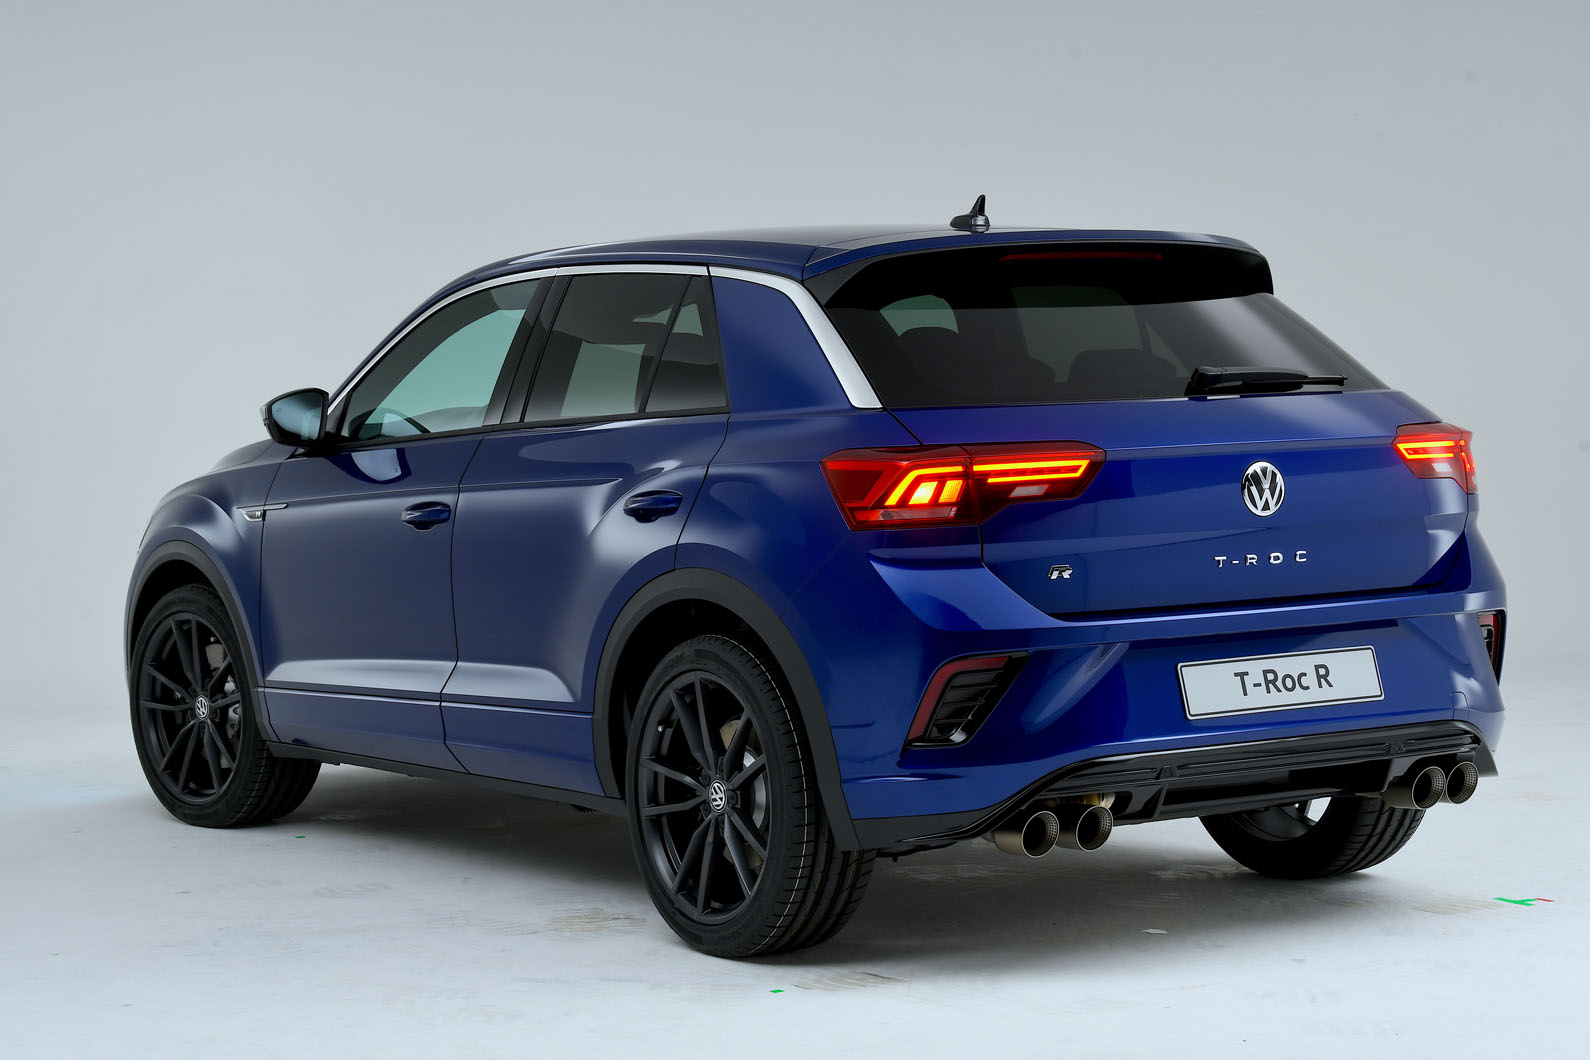 Volkswagen T-Roc R: hot compact SUV on sale from £38,450